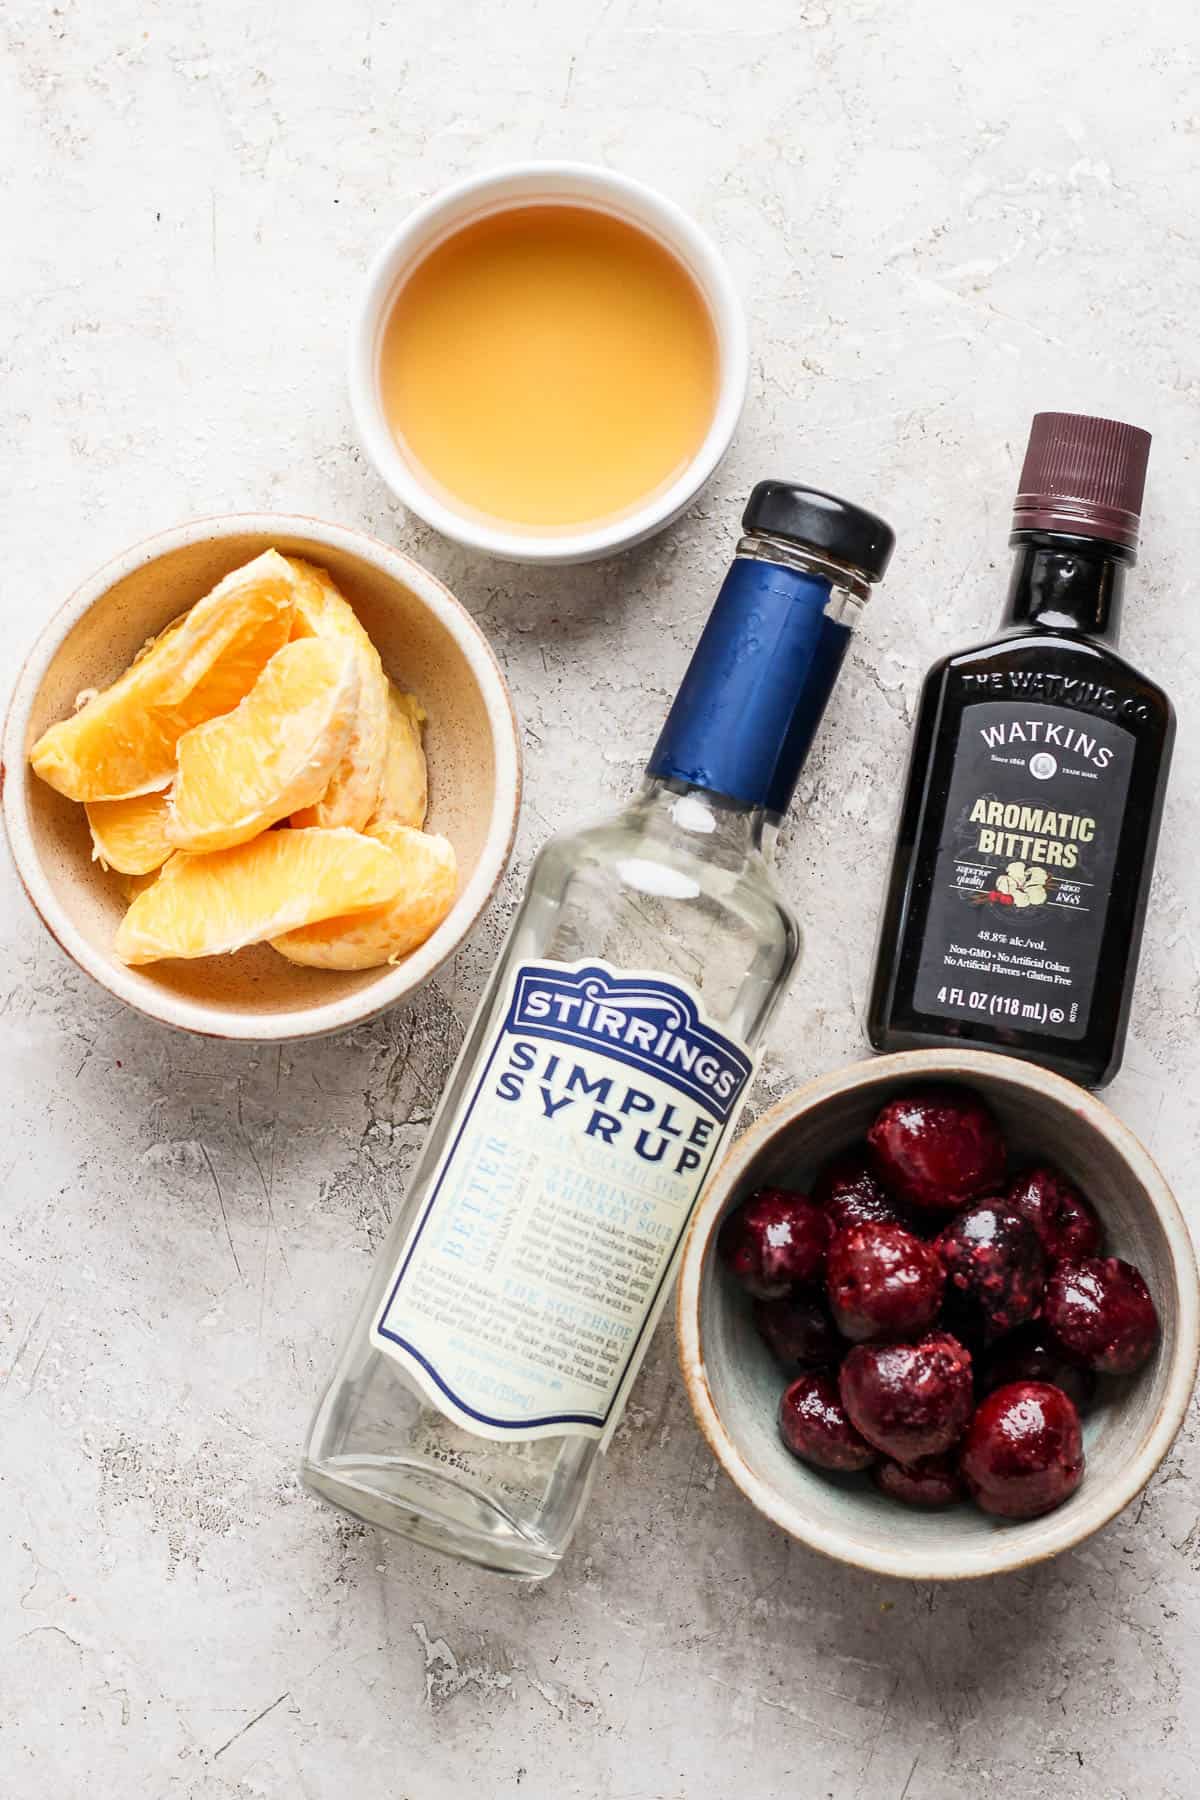 Ingredients for a frozen old fashioned in separate bowls.